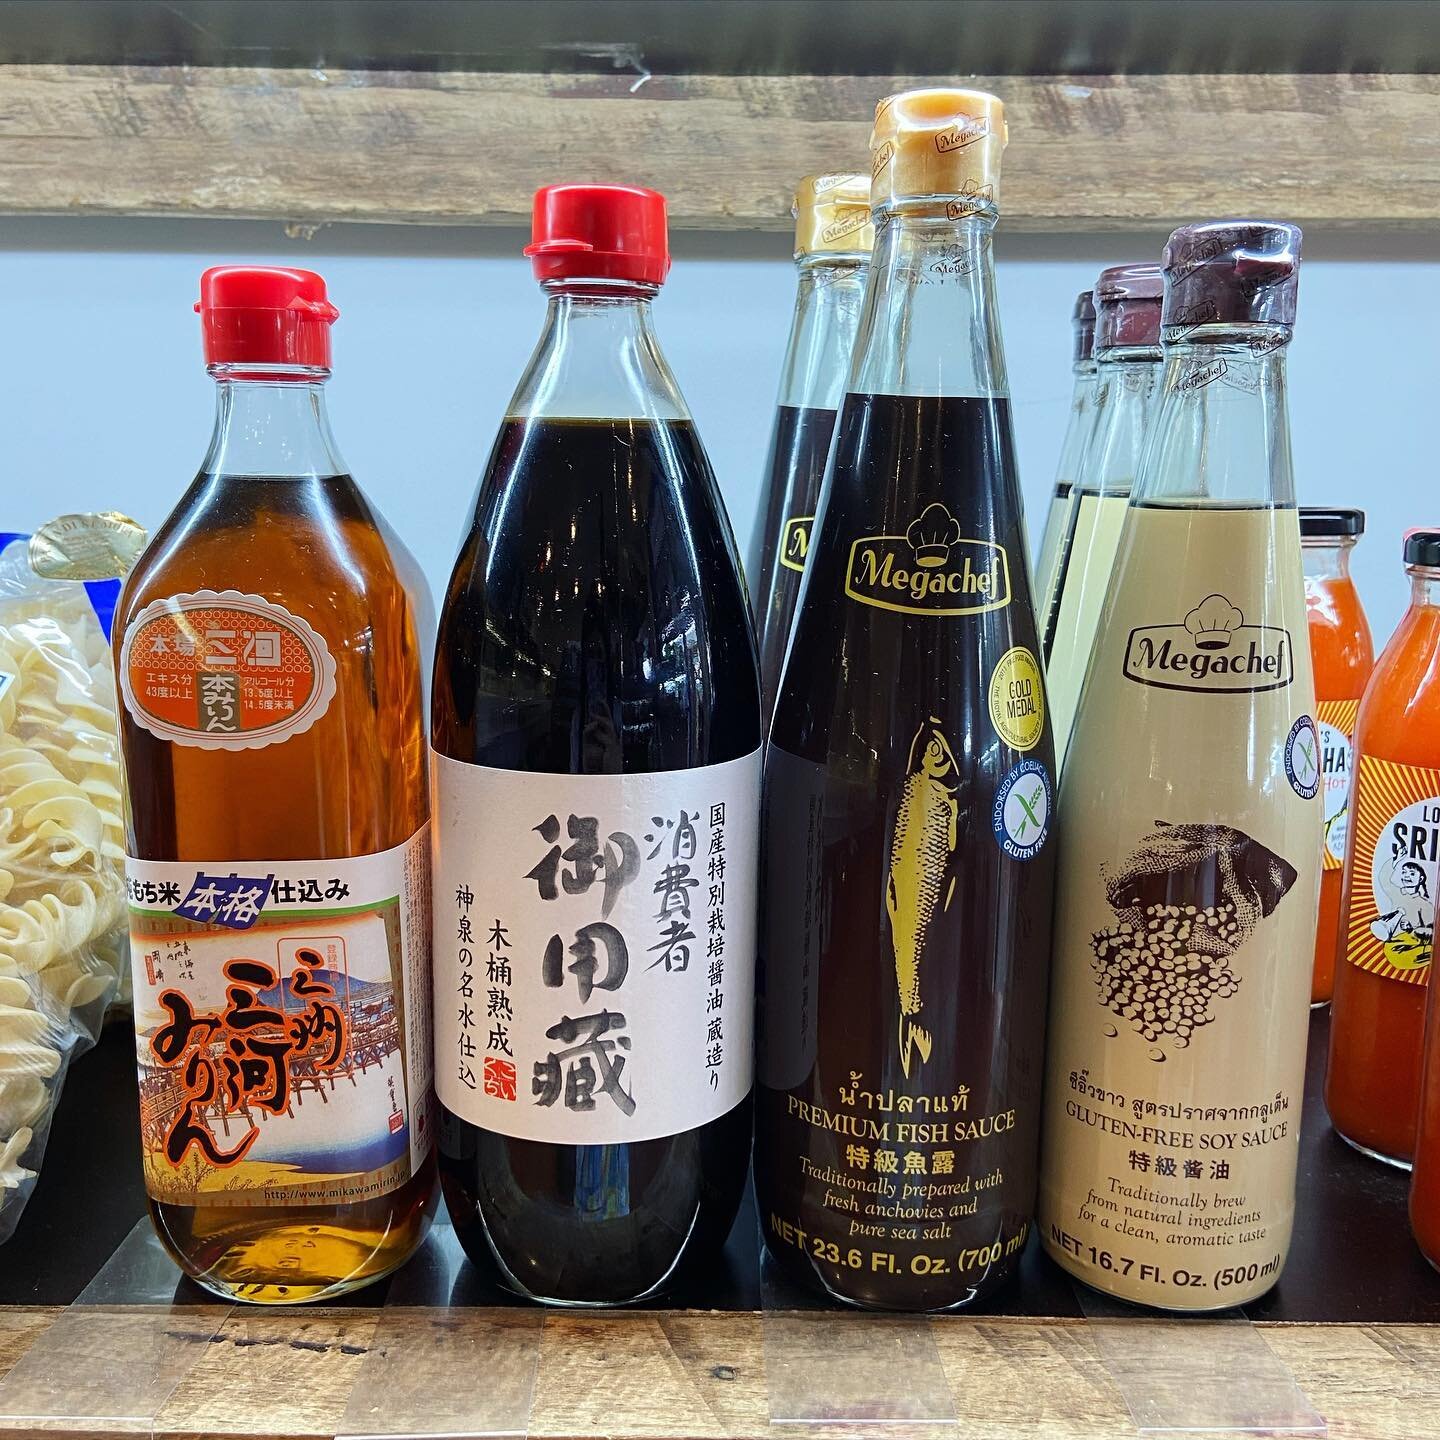 At the Deli we have a carefully curated selection of Japanese products including these authentic fish &amp; soy sauces. The perfect gift for a foodie or to spice up your pantry 🎏